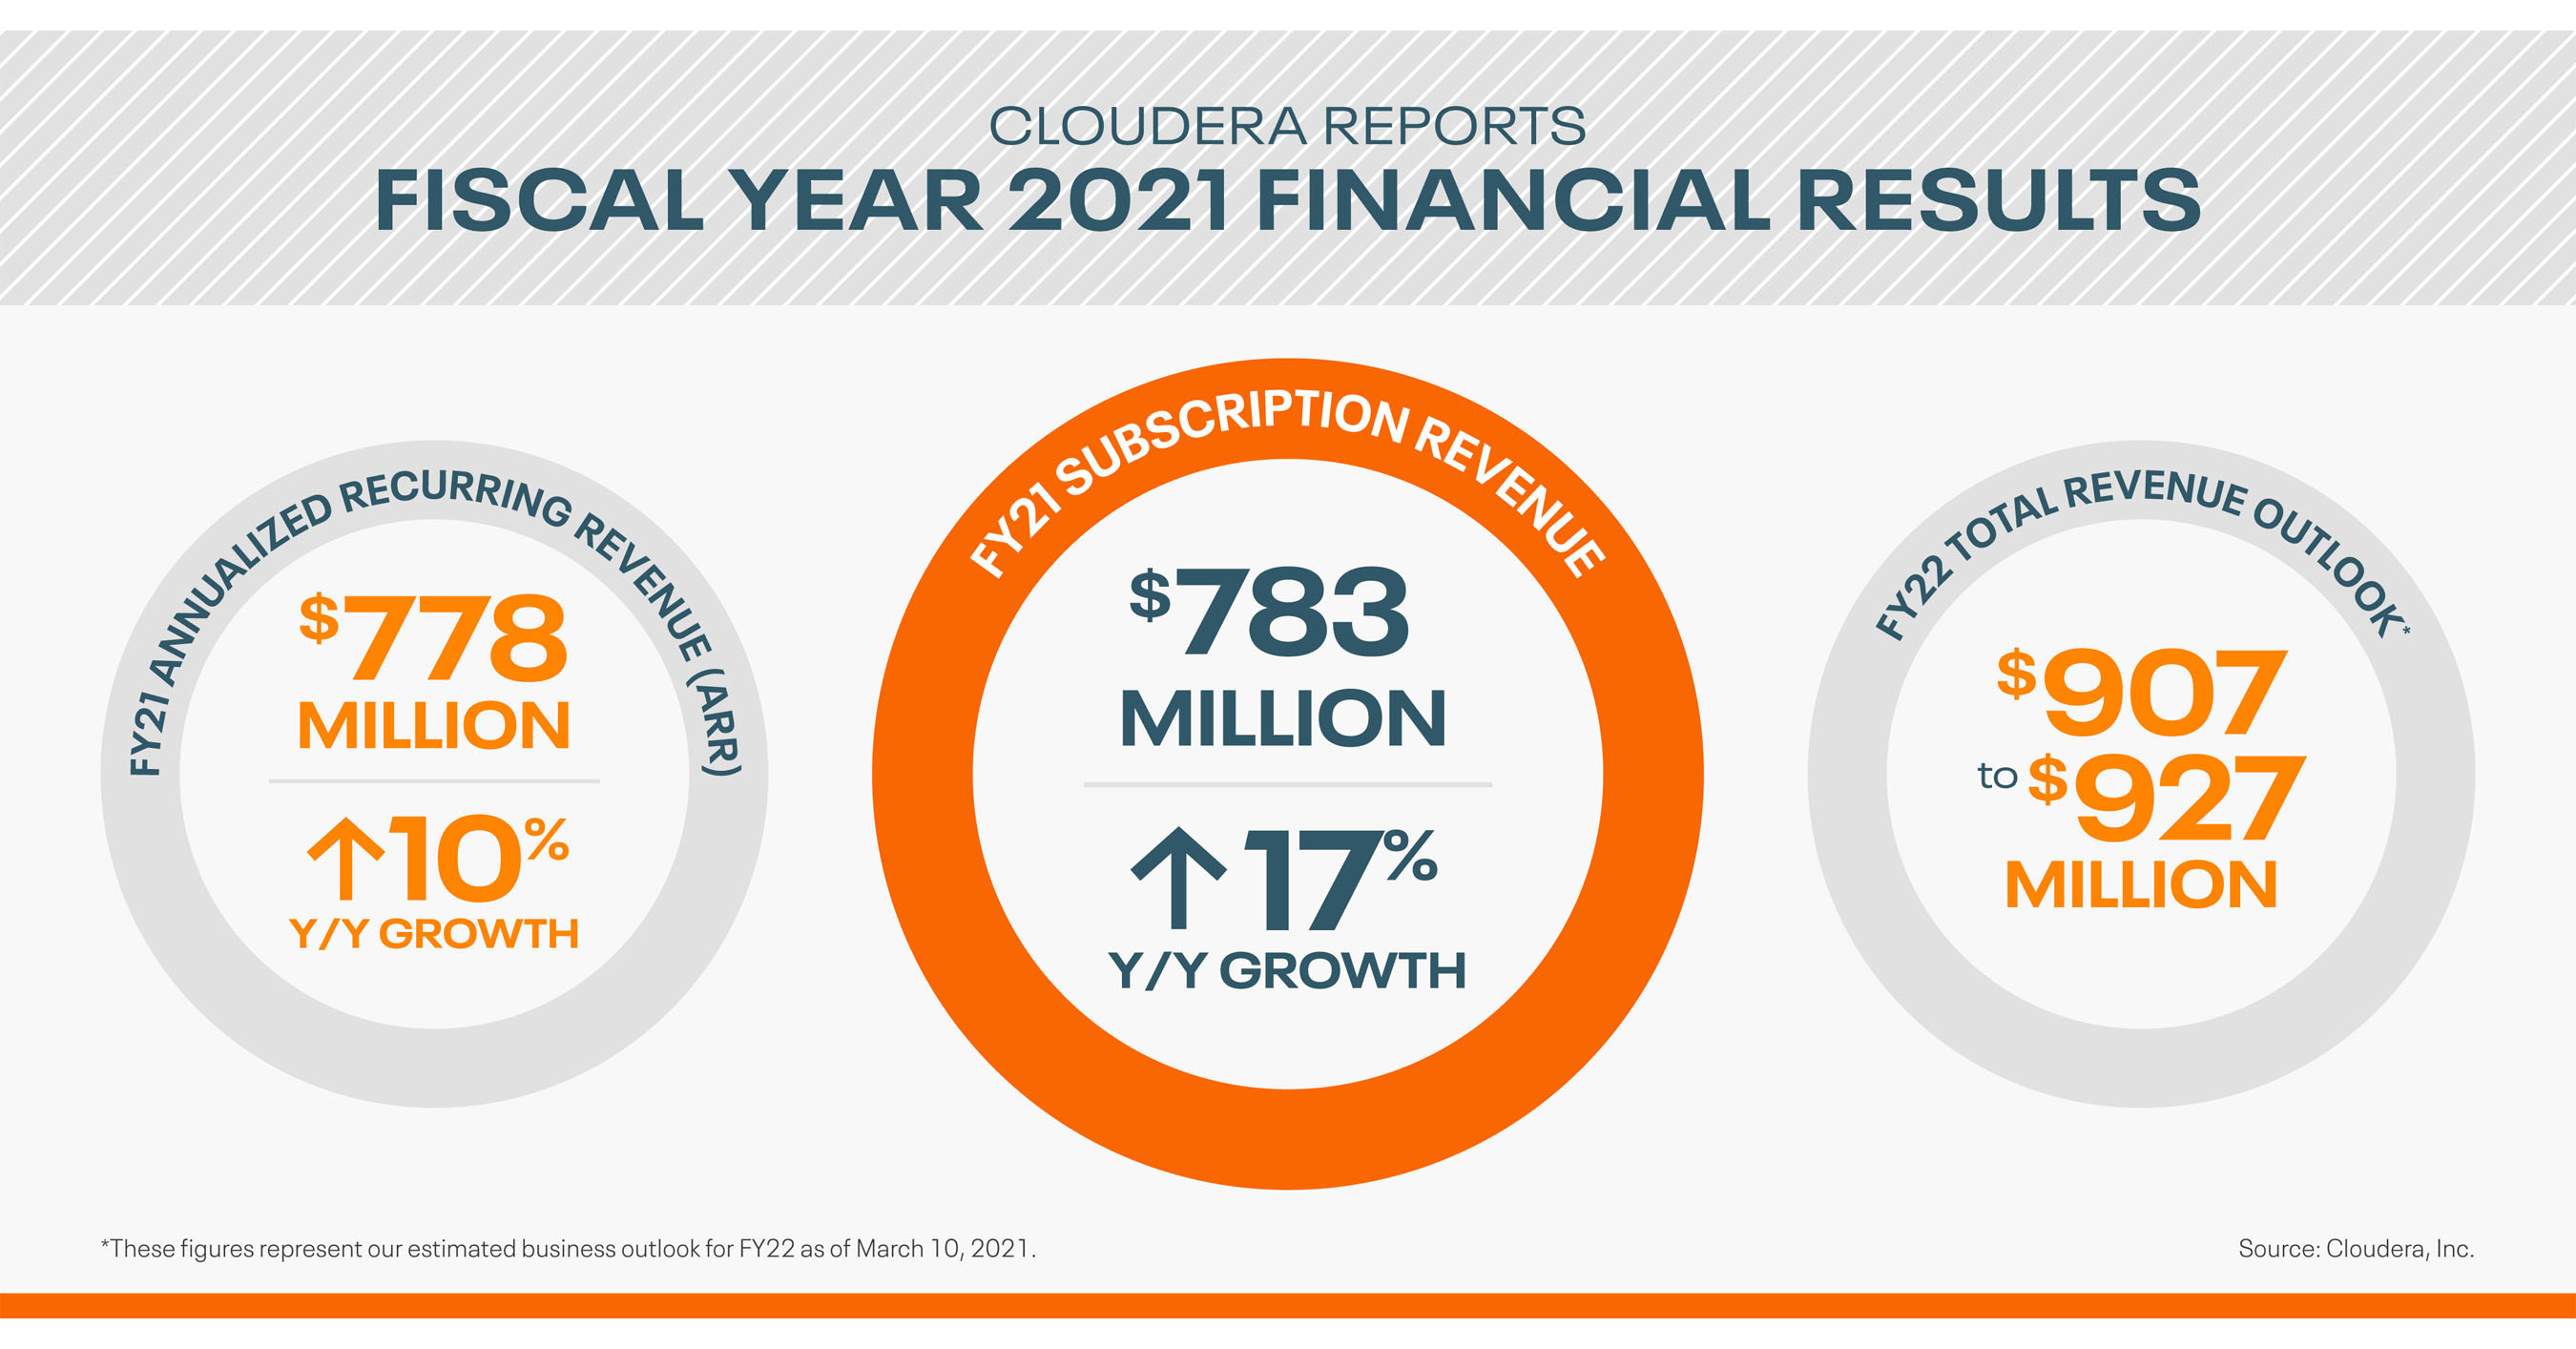 Financial results for 2021/22, News